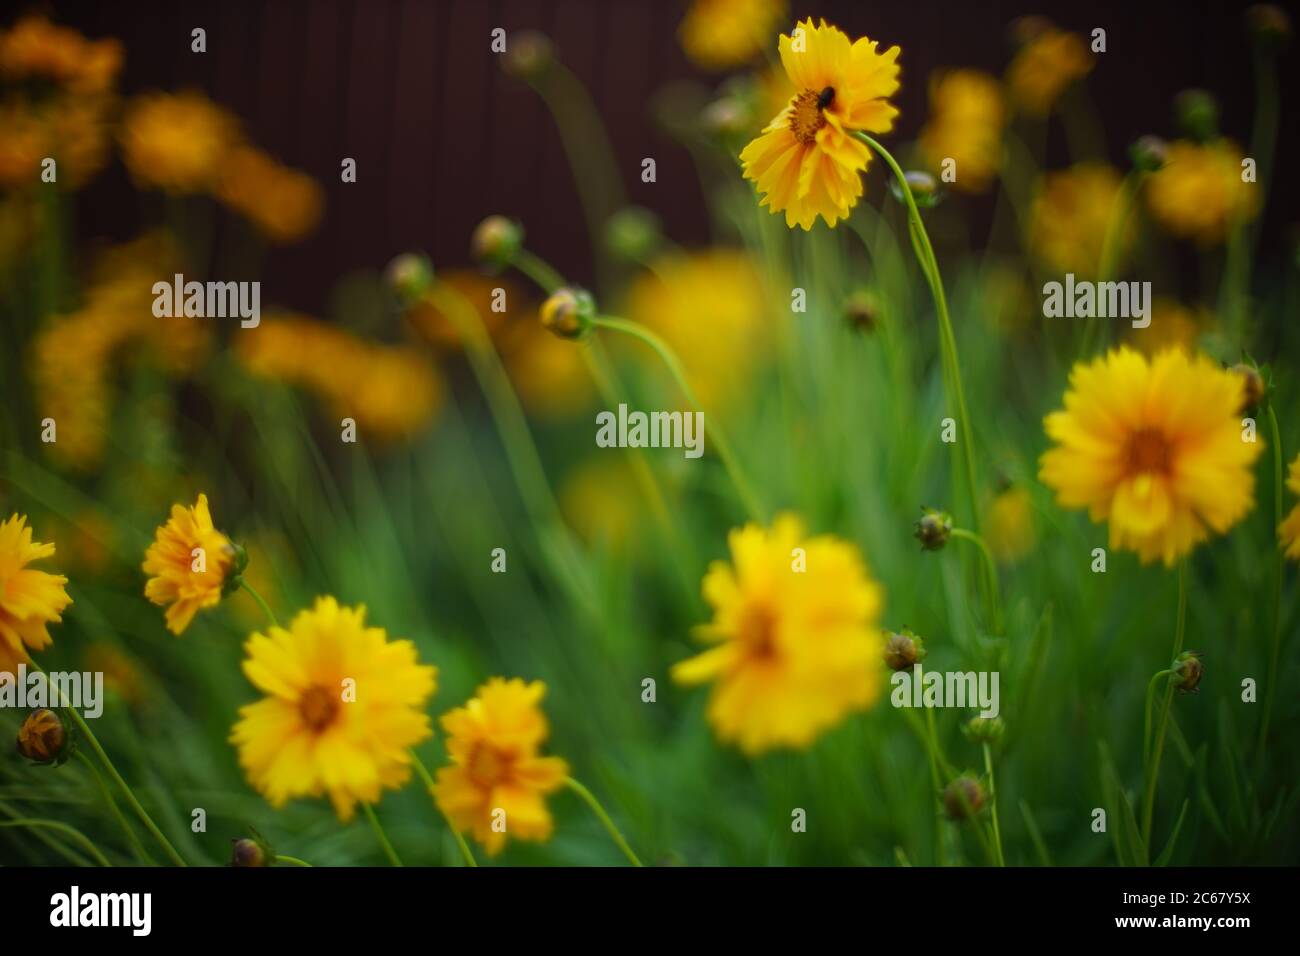 Coreopsis yellow flowers grow in the evening garden. Stock Photo